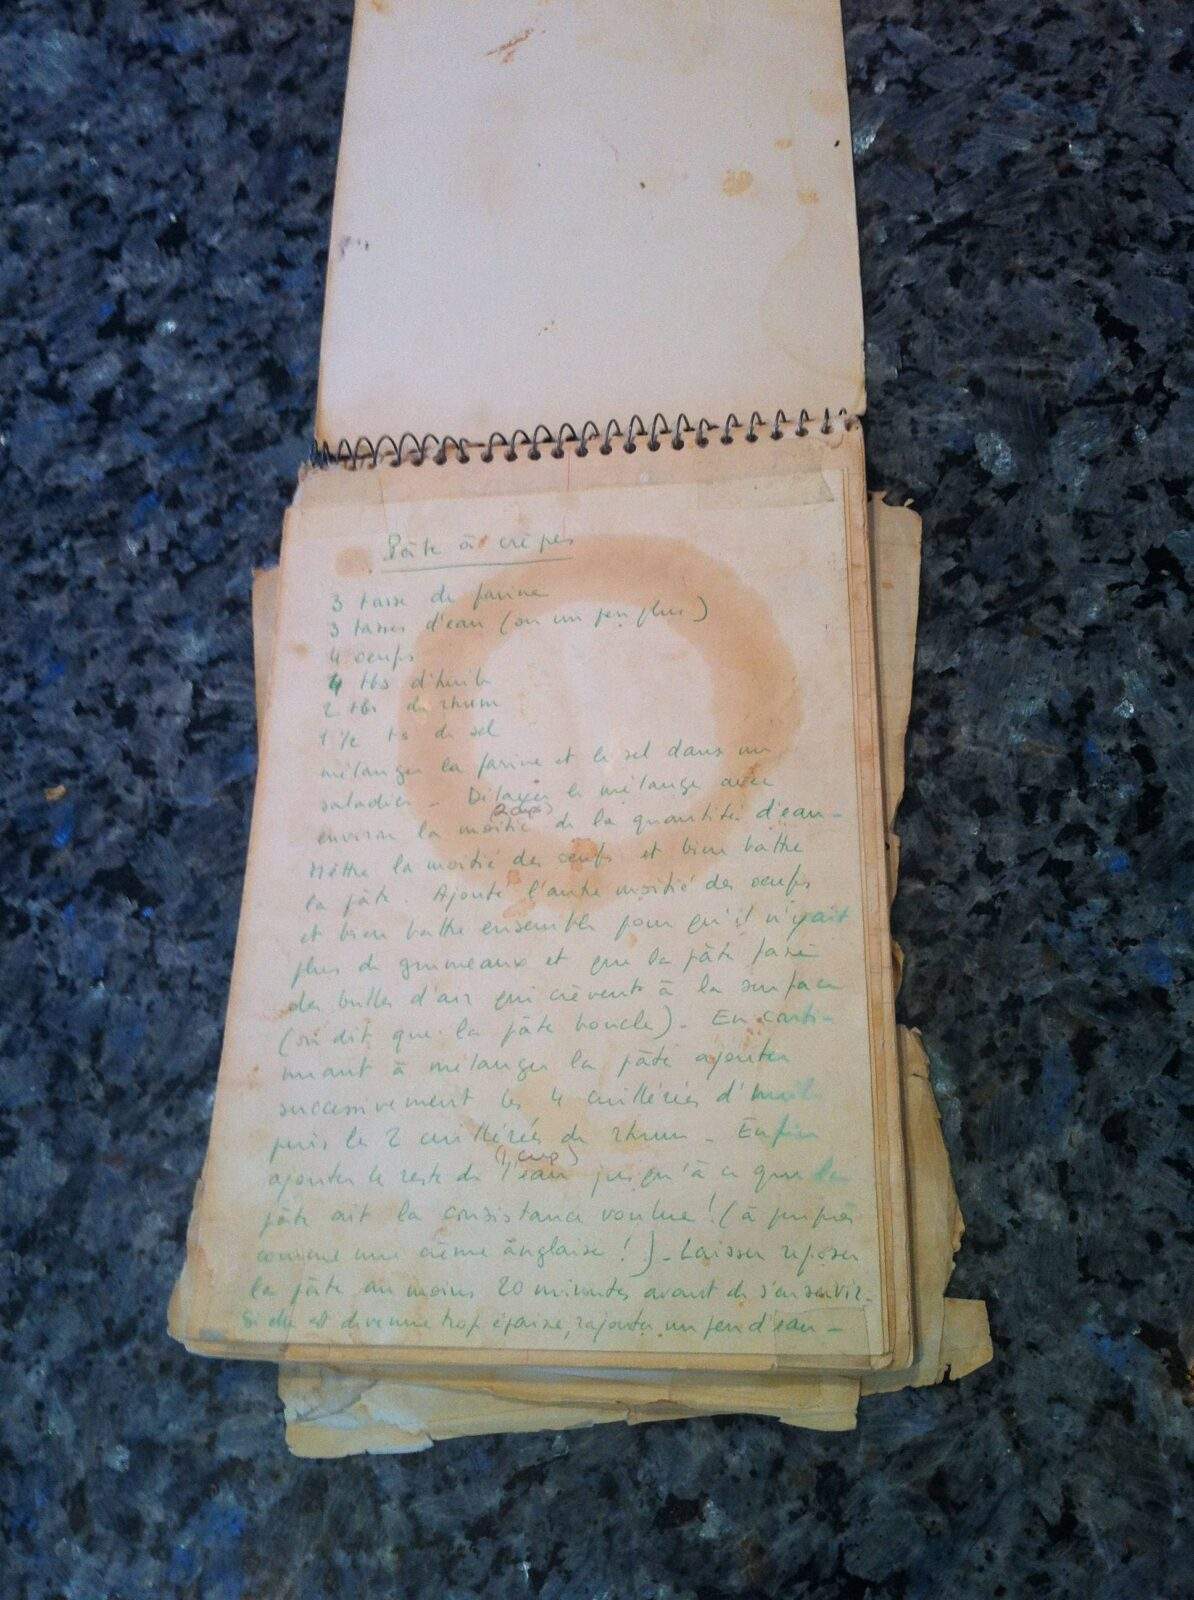 A notepad with the original crepe recipe as written by my French mother.